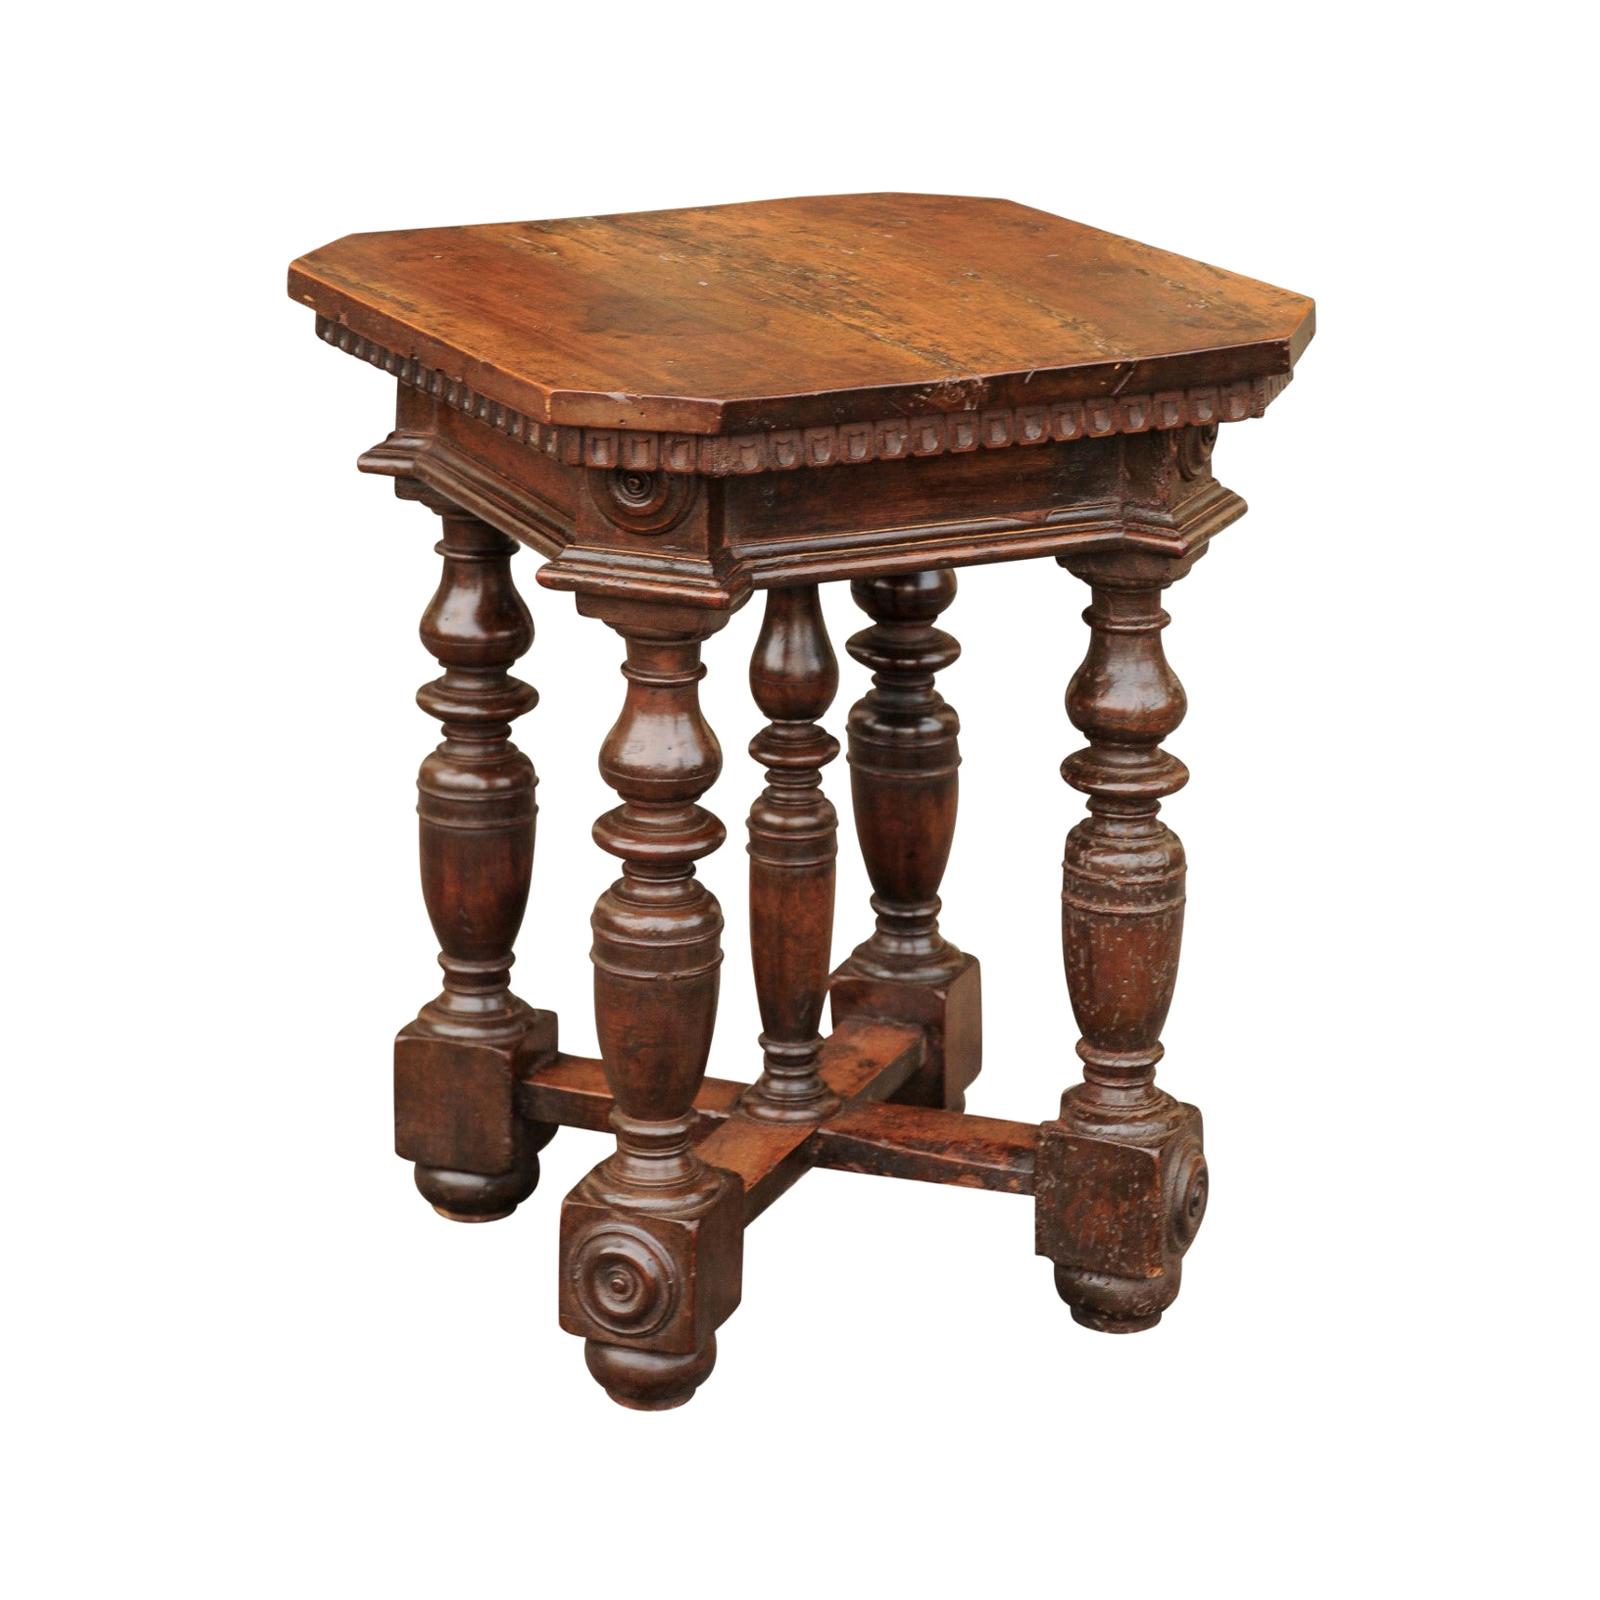 Italian 1860s Walnut Side Table with Scoop Patterns, Turned Base and Stretcher